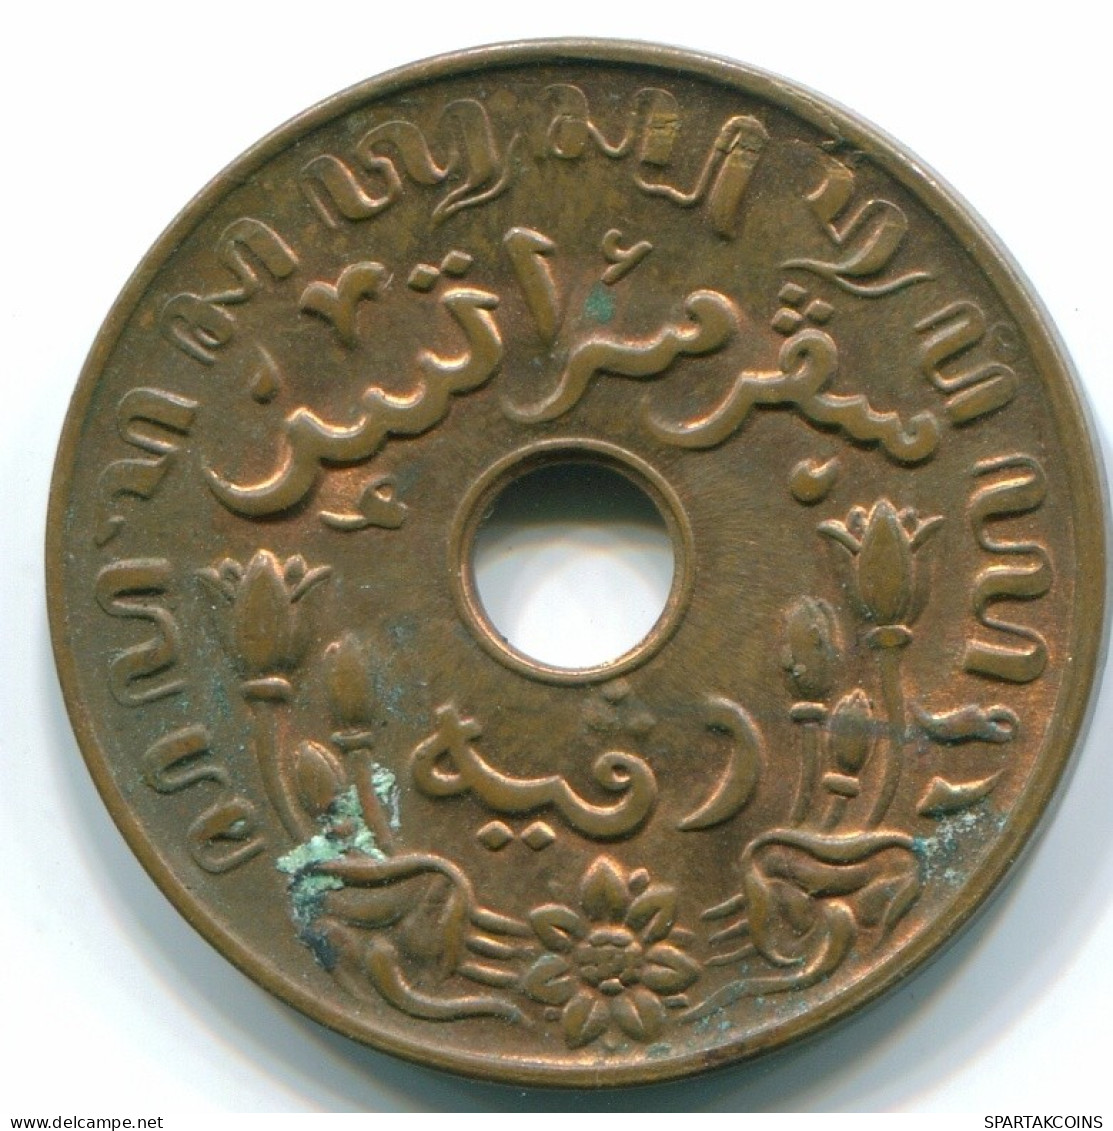 1 CENT 1945 S NETHERLANDS EAST INDIES INDONESIA Bronze Colonial Coin #S10371.U.A - Dutch East Indies